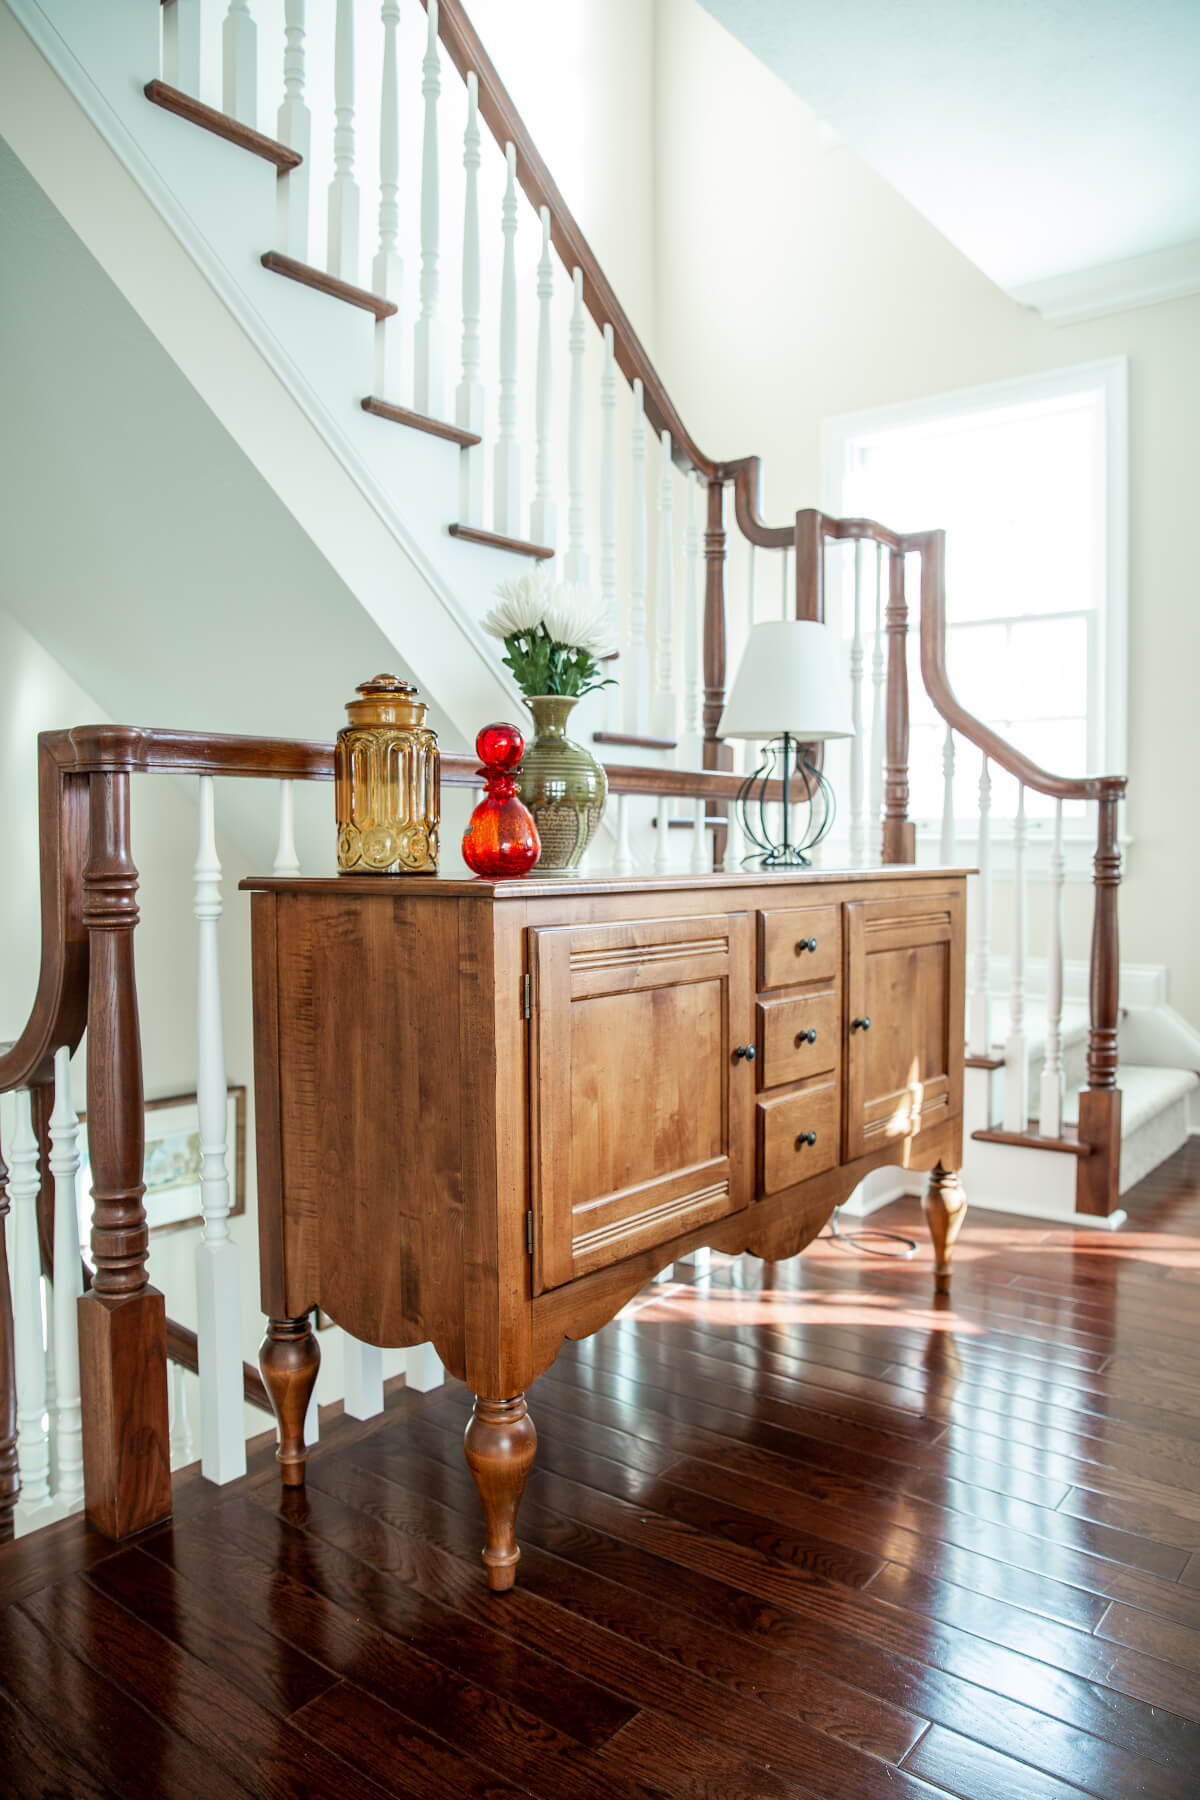 Living Room Buffet in nook by staircase Eclectic Interiors Ohio